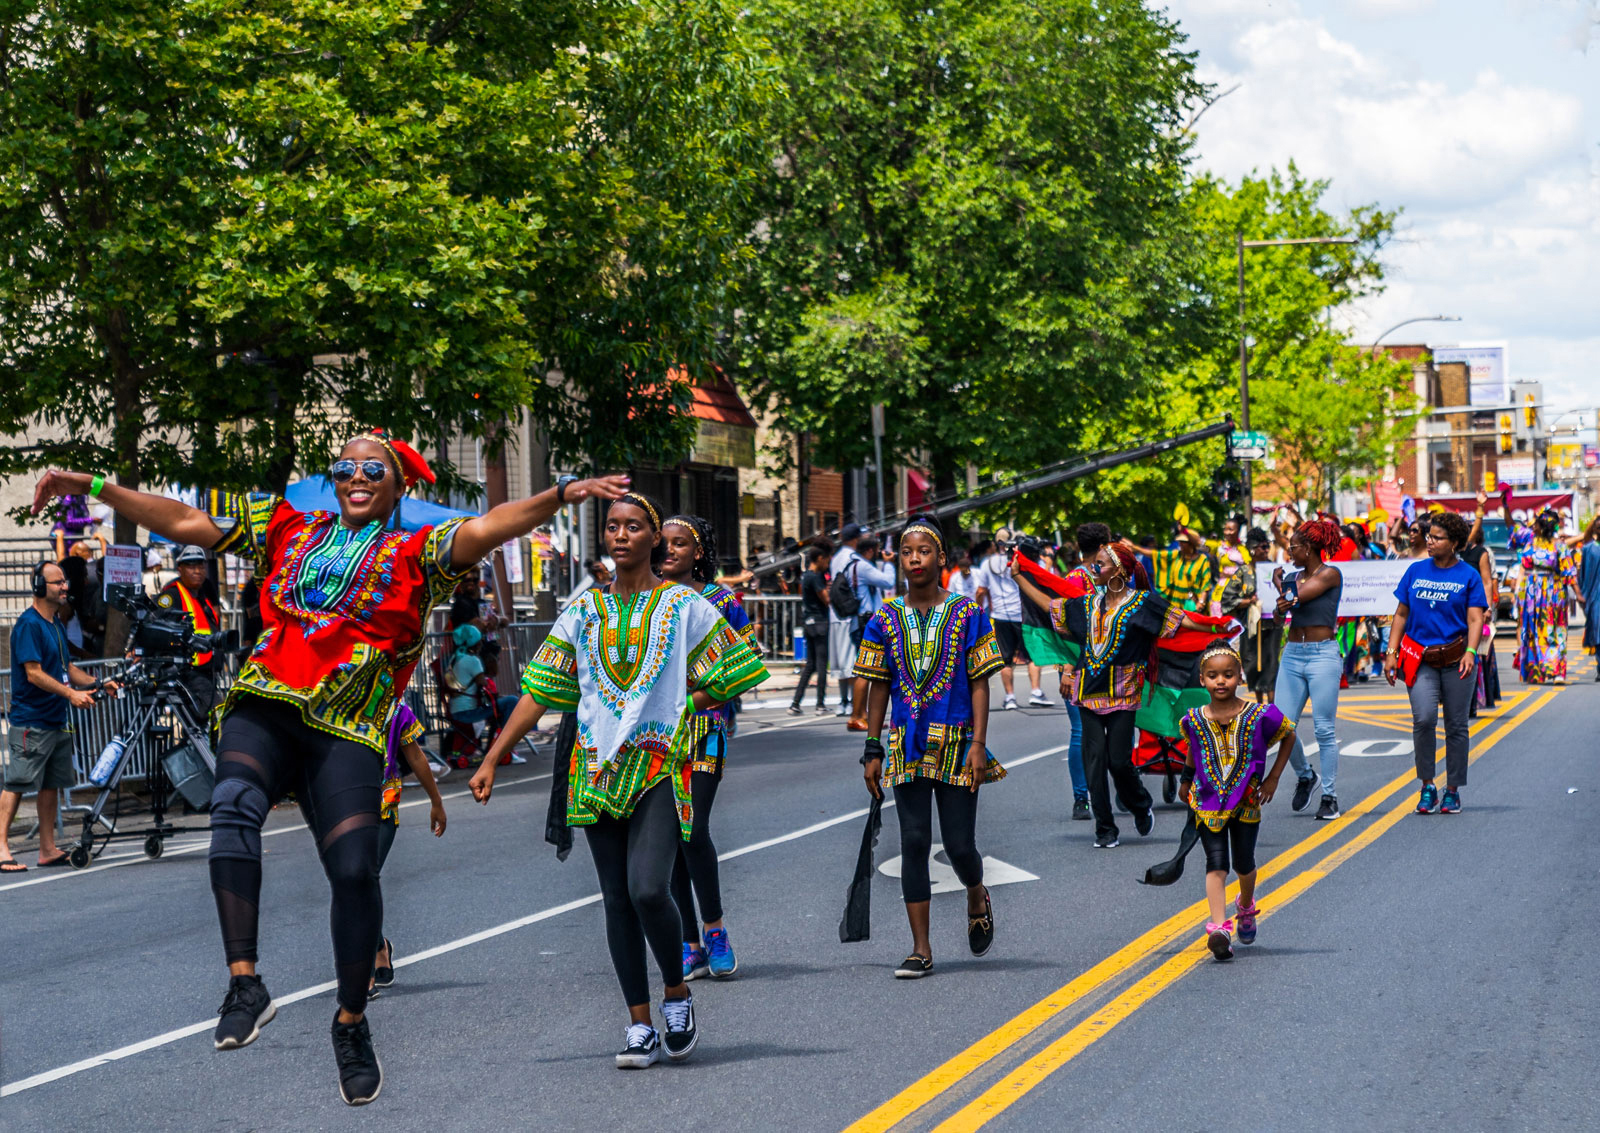 A Juneteenth parade in Philadelphia streets.